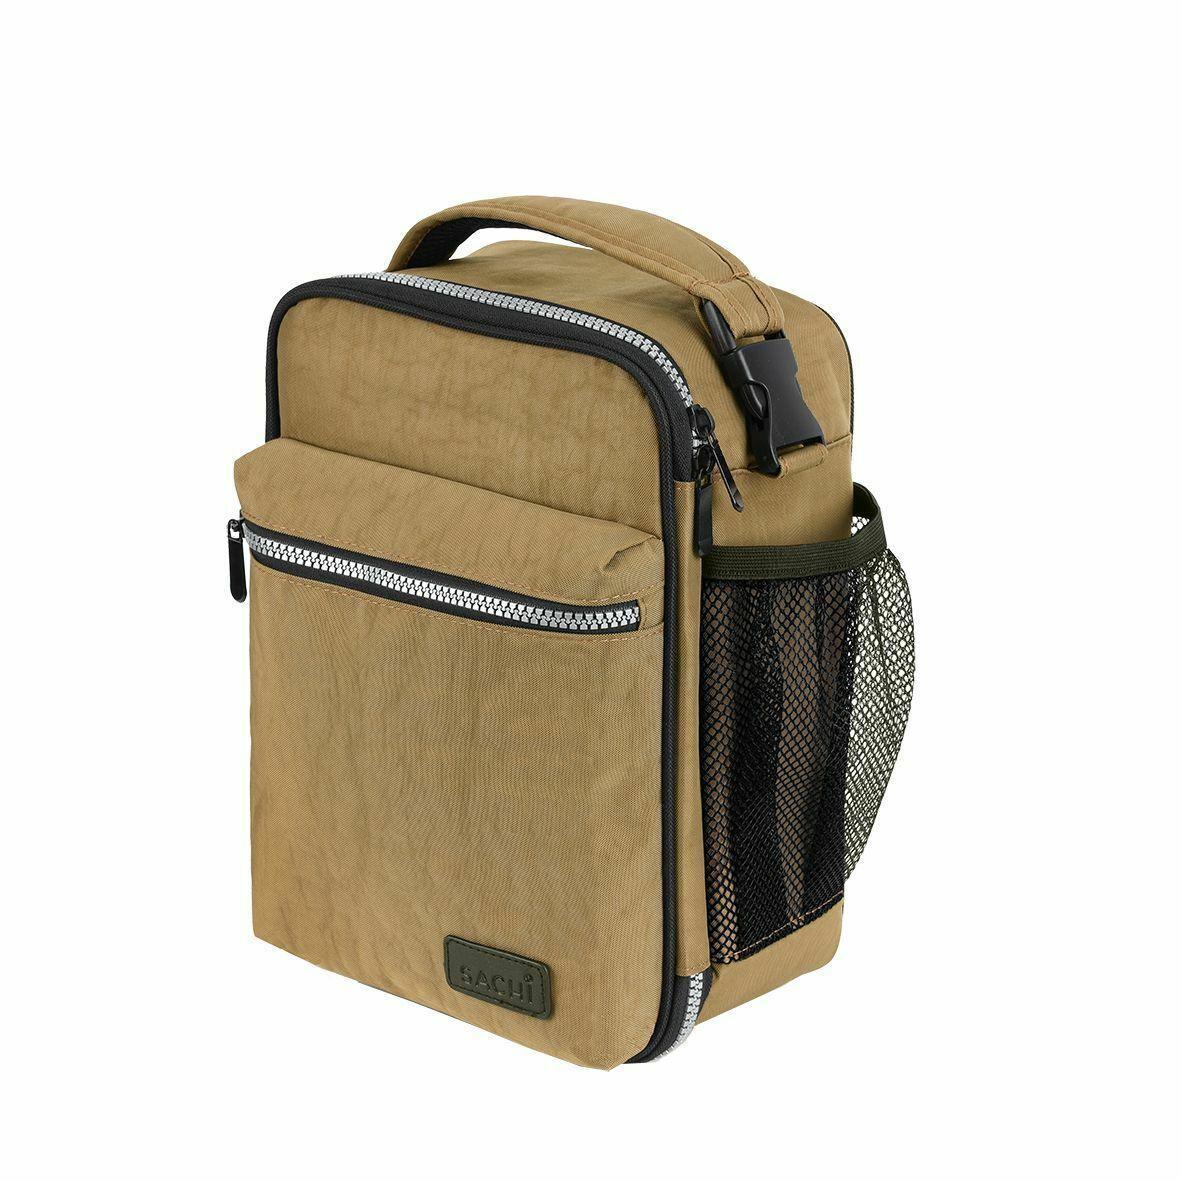 Sachi Insulated Lunch Snack Tote Bag Thermal Cooler Carry School Khaki